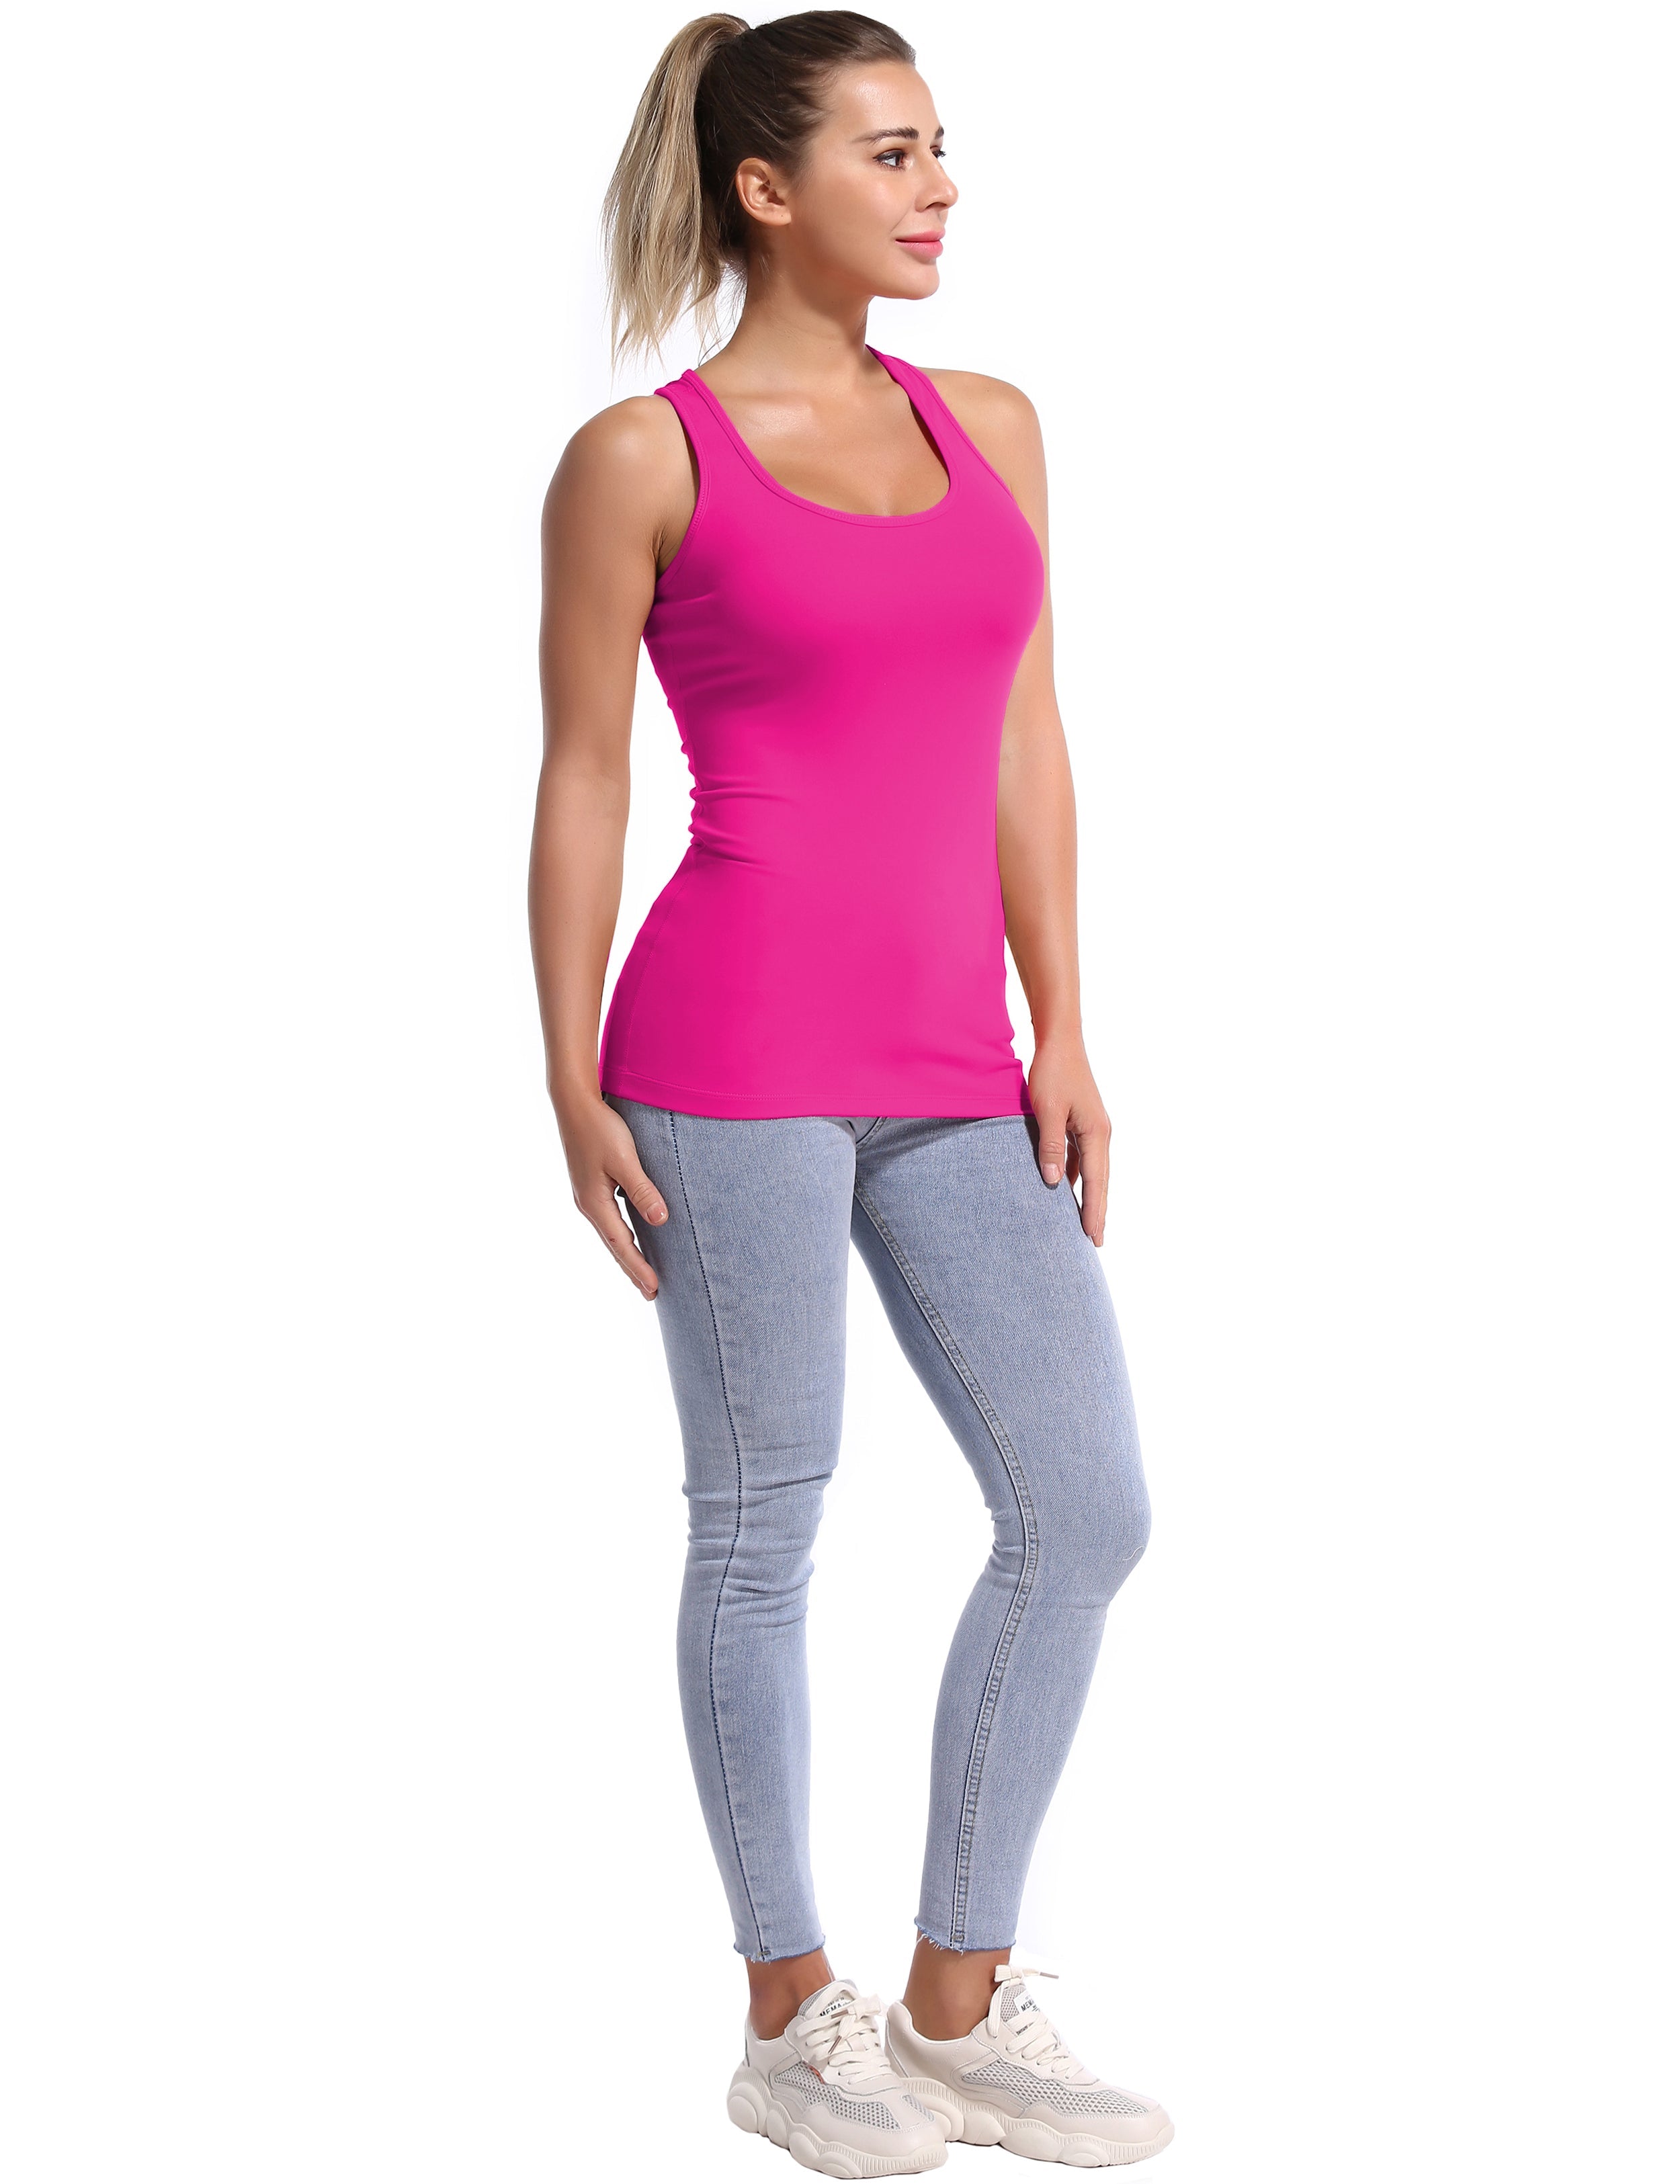 Racerback Athletic Tank Tops magenta 92%Nylon/8%Spandex(Cotton Soft) Designed for Yoga Tight Fit So buttery soft, it feels weightless Sweat-wicking Four-way stretch Breathable Contours your body Sits below the waistband for moderate, everyday coverage